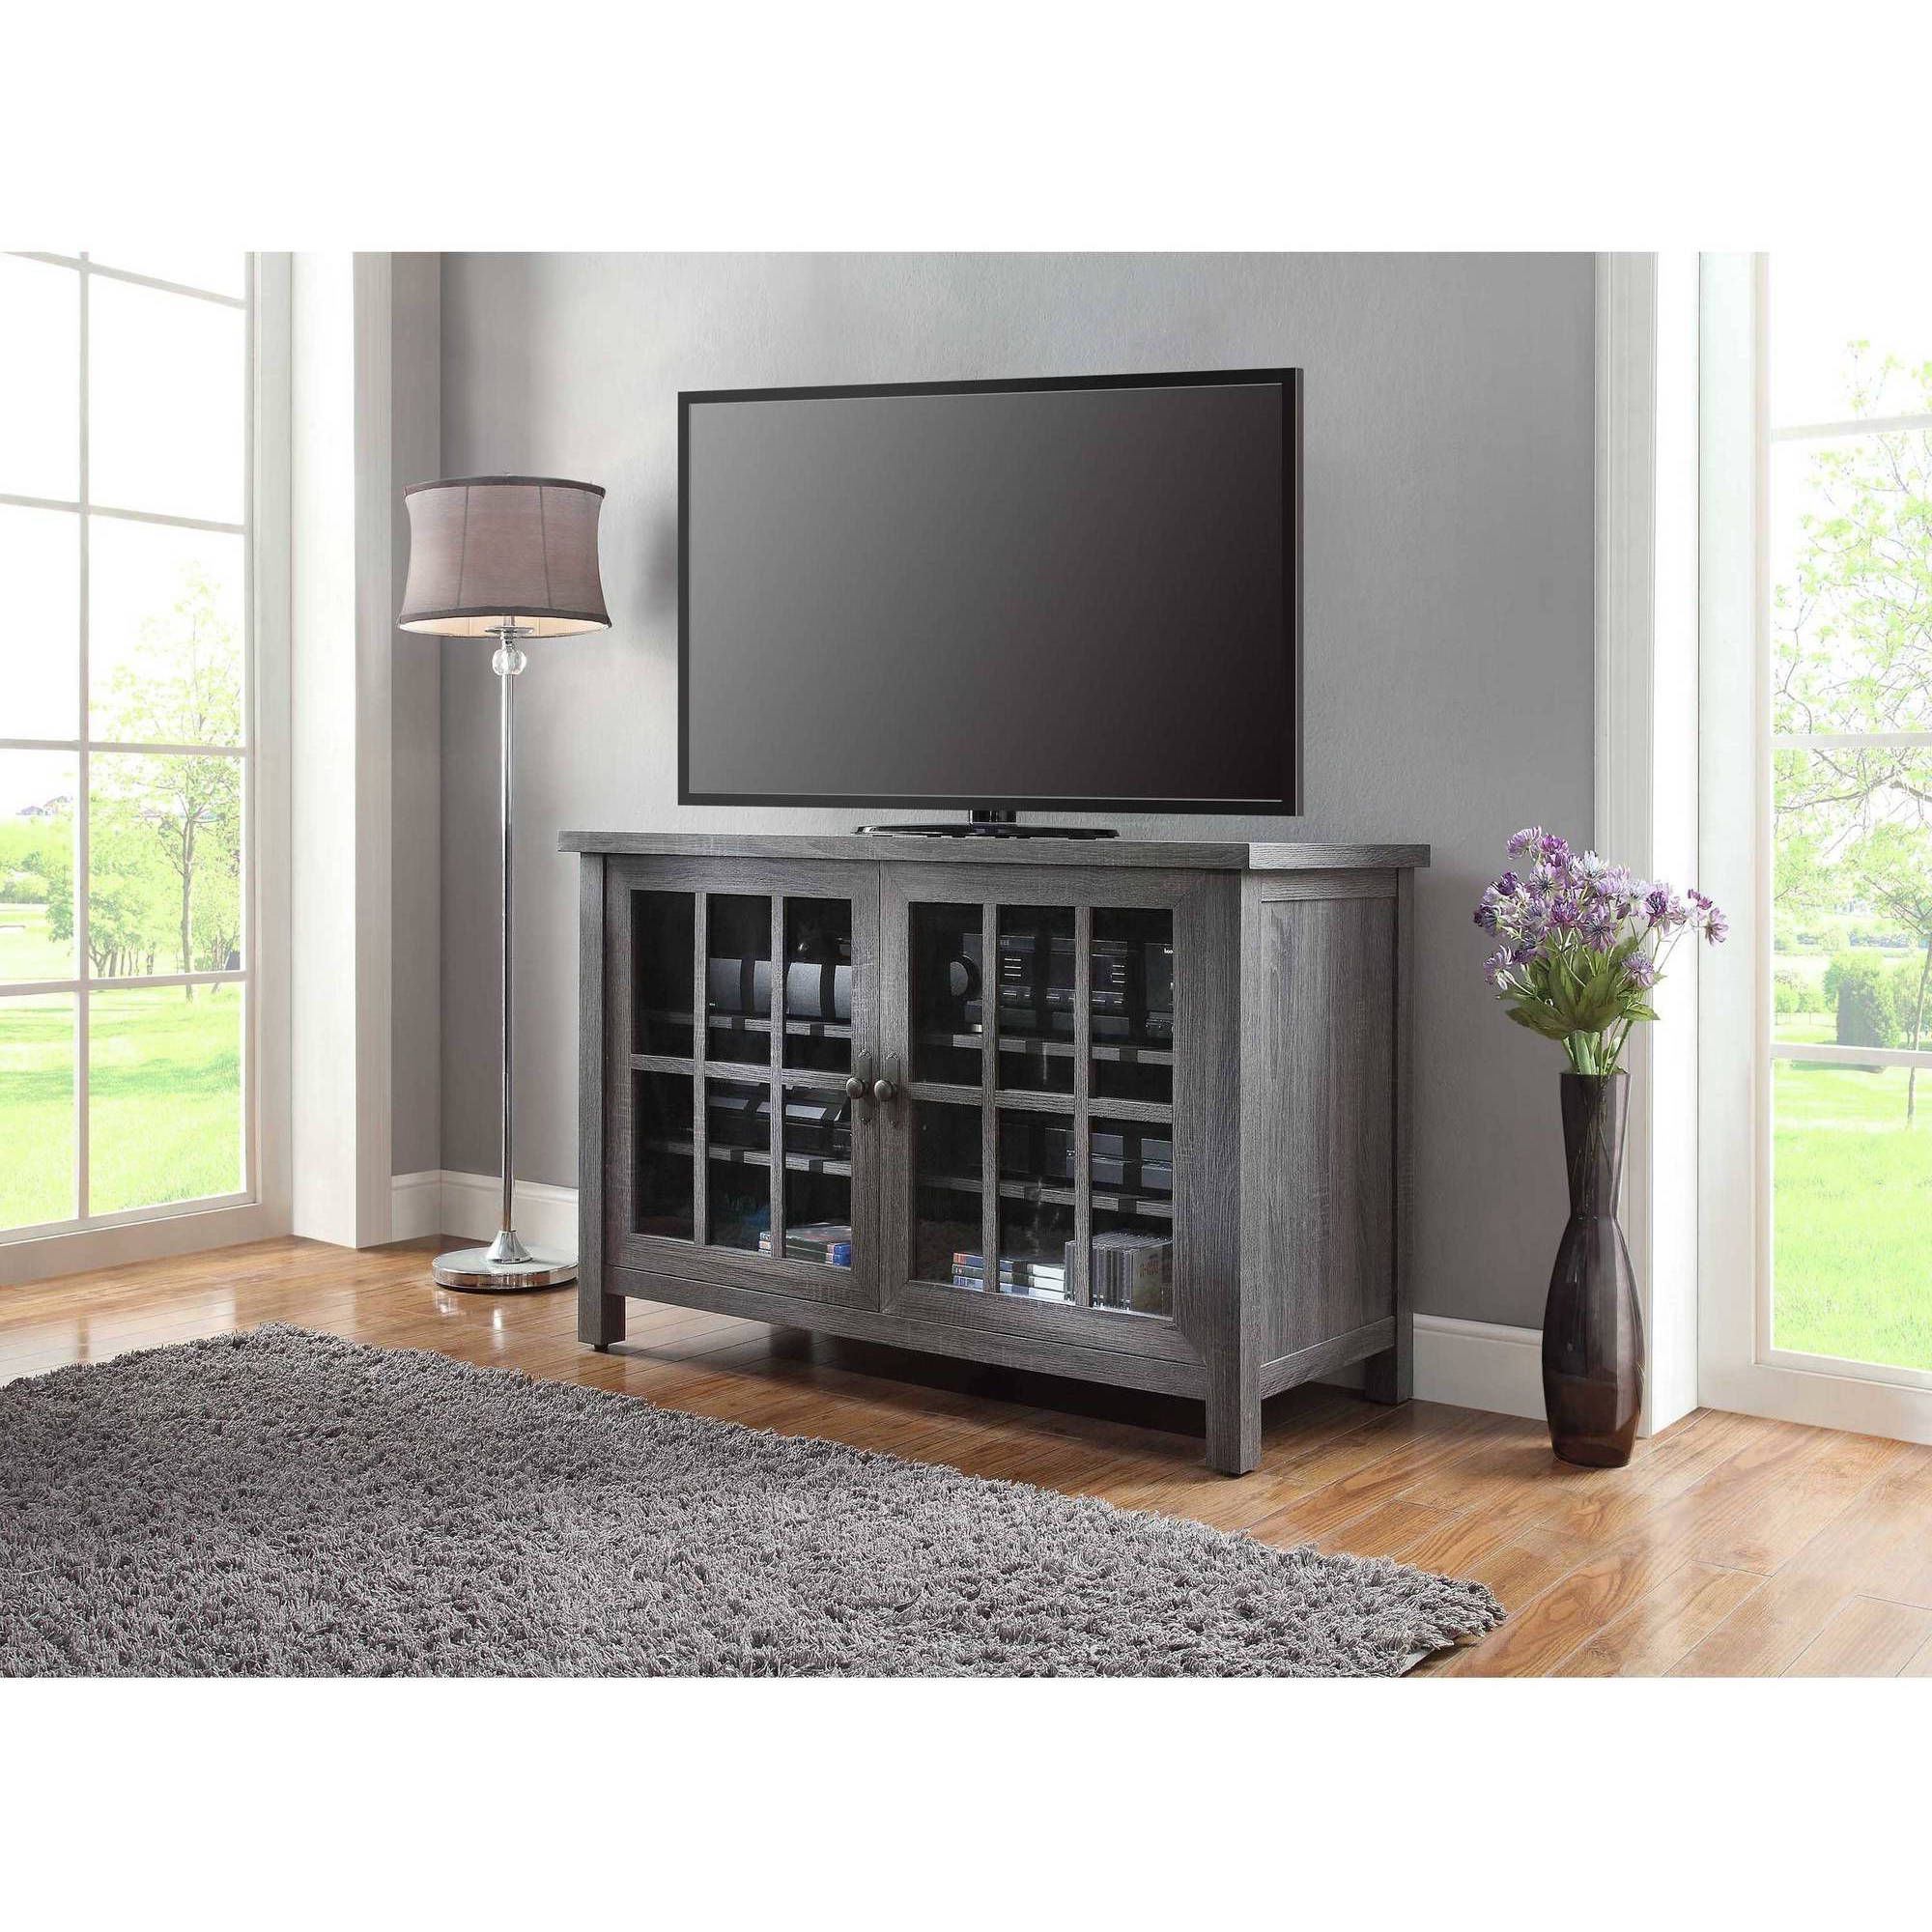 Preferred Better Homes And Gardens Oxford Square Tv Console For Tvs Up To 55 Intended For Oxford 70 Inch Tv Stands (View 3 of 20)